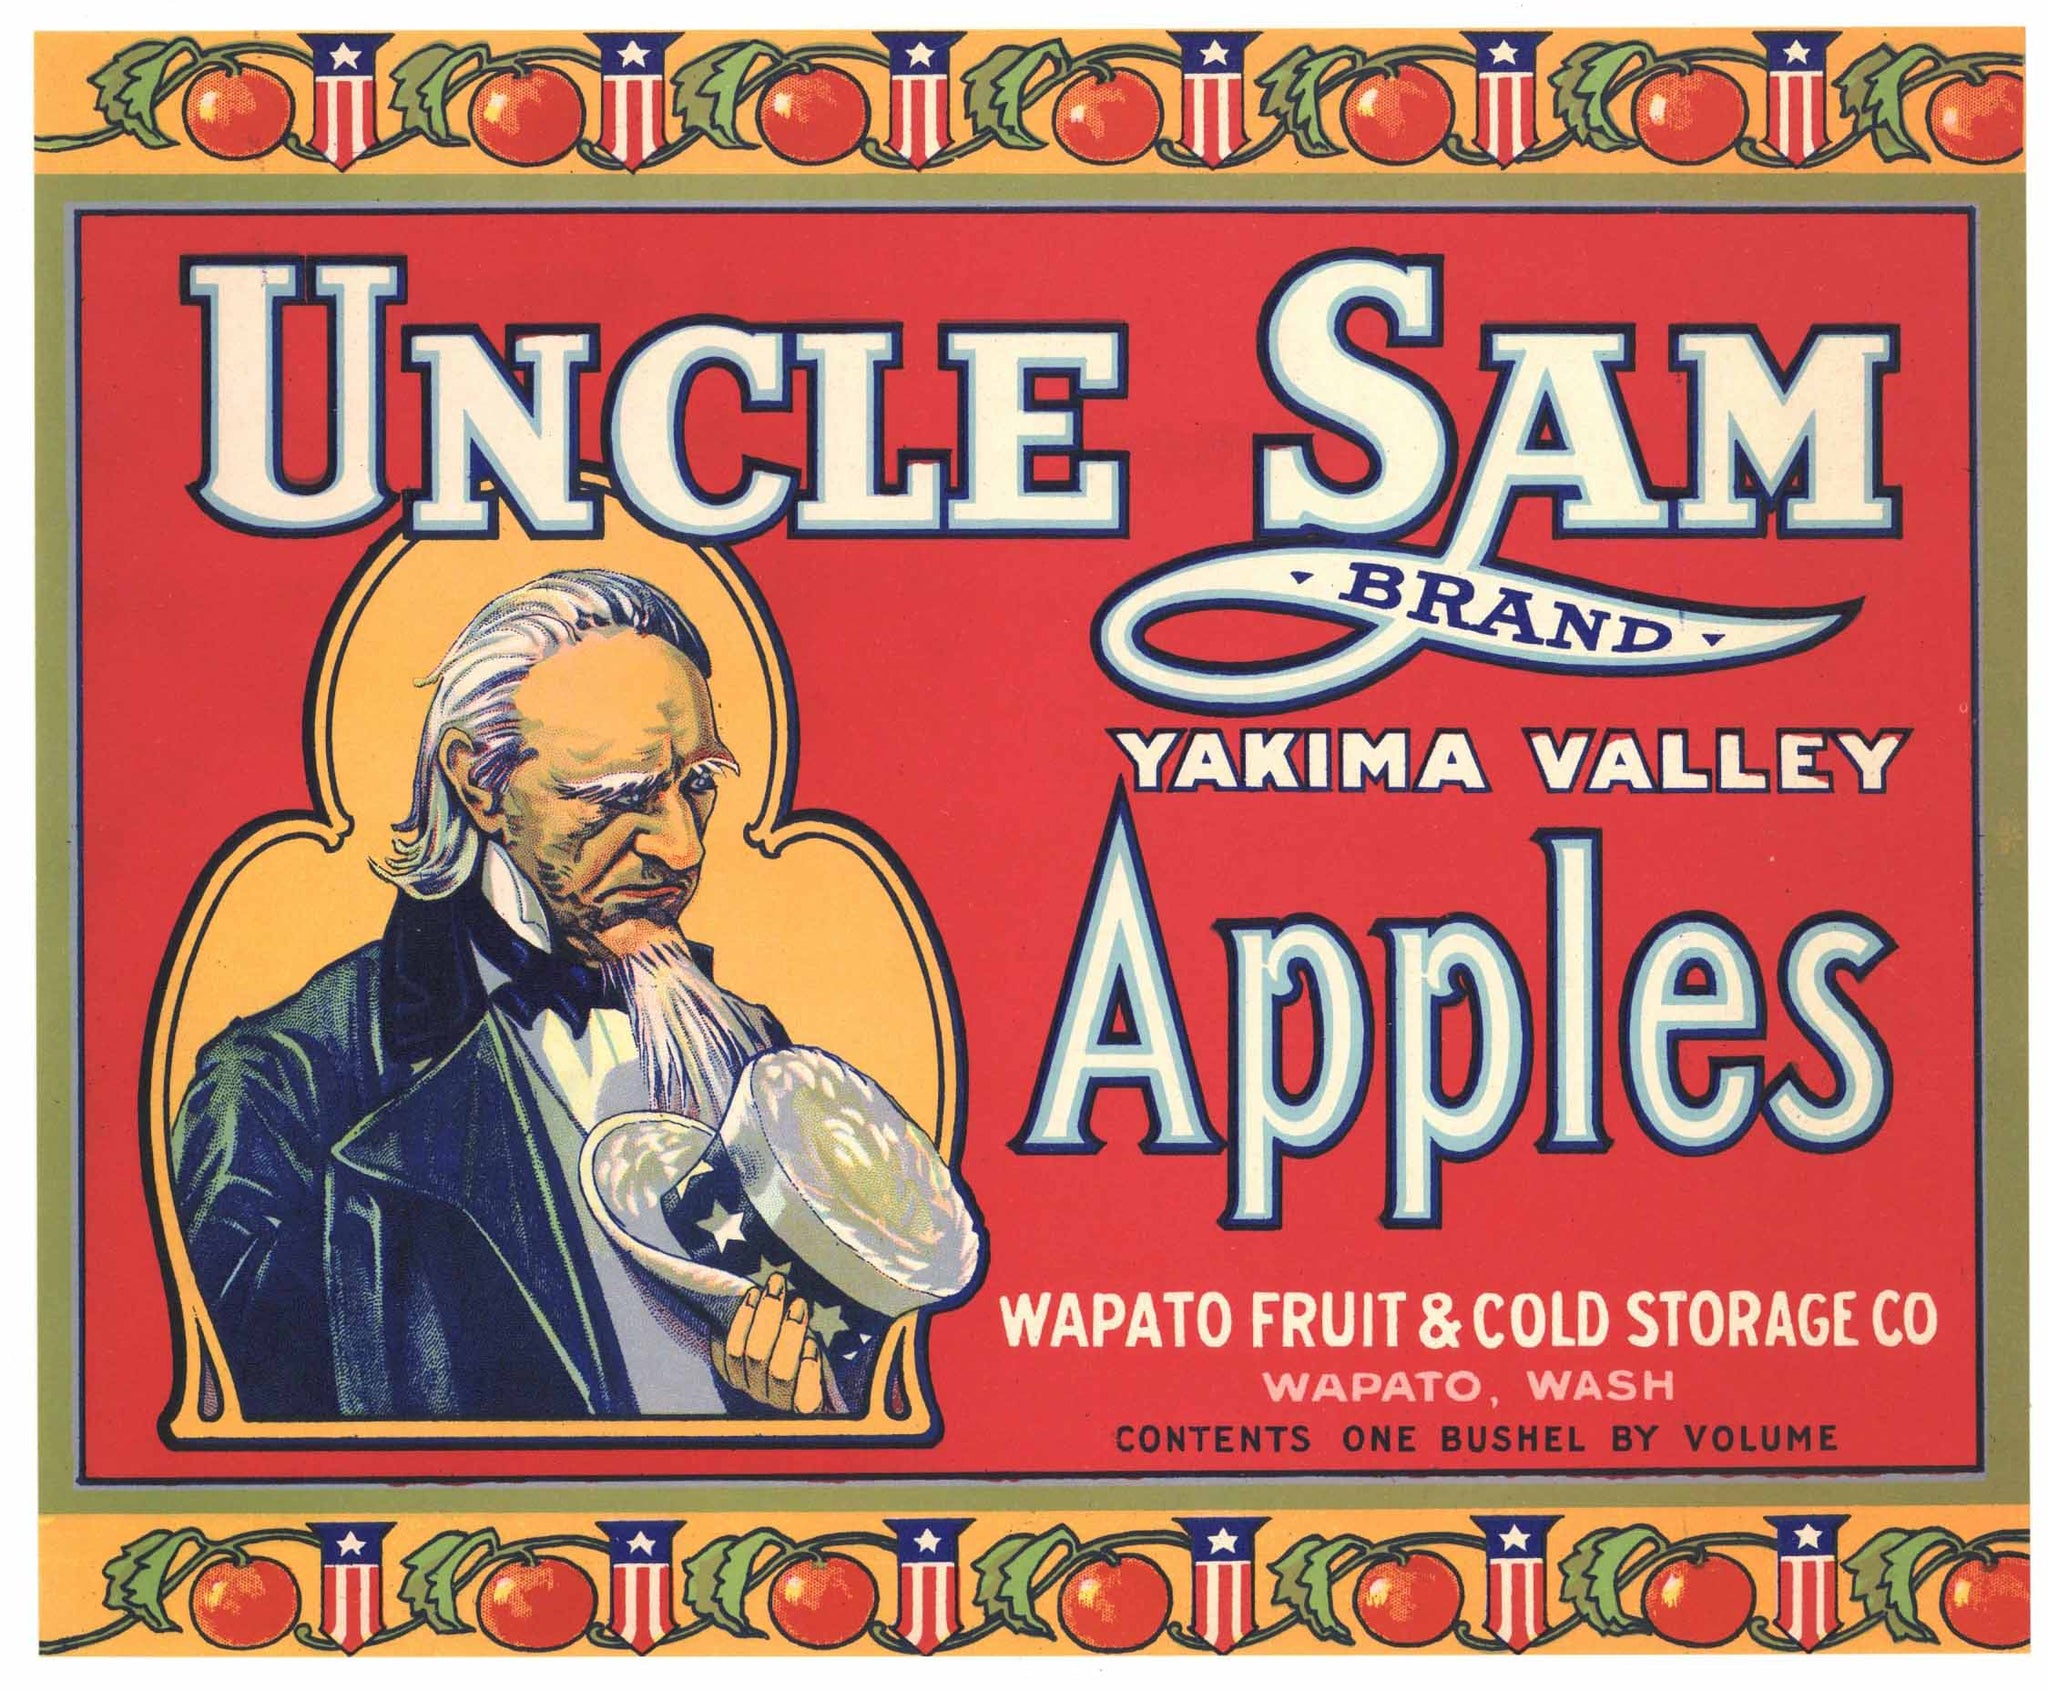 Uncle Sam Brand Wapato Washington Apple Crate Label, red